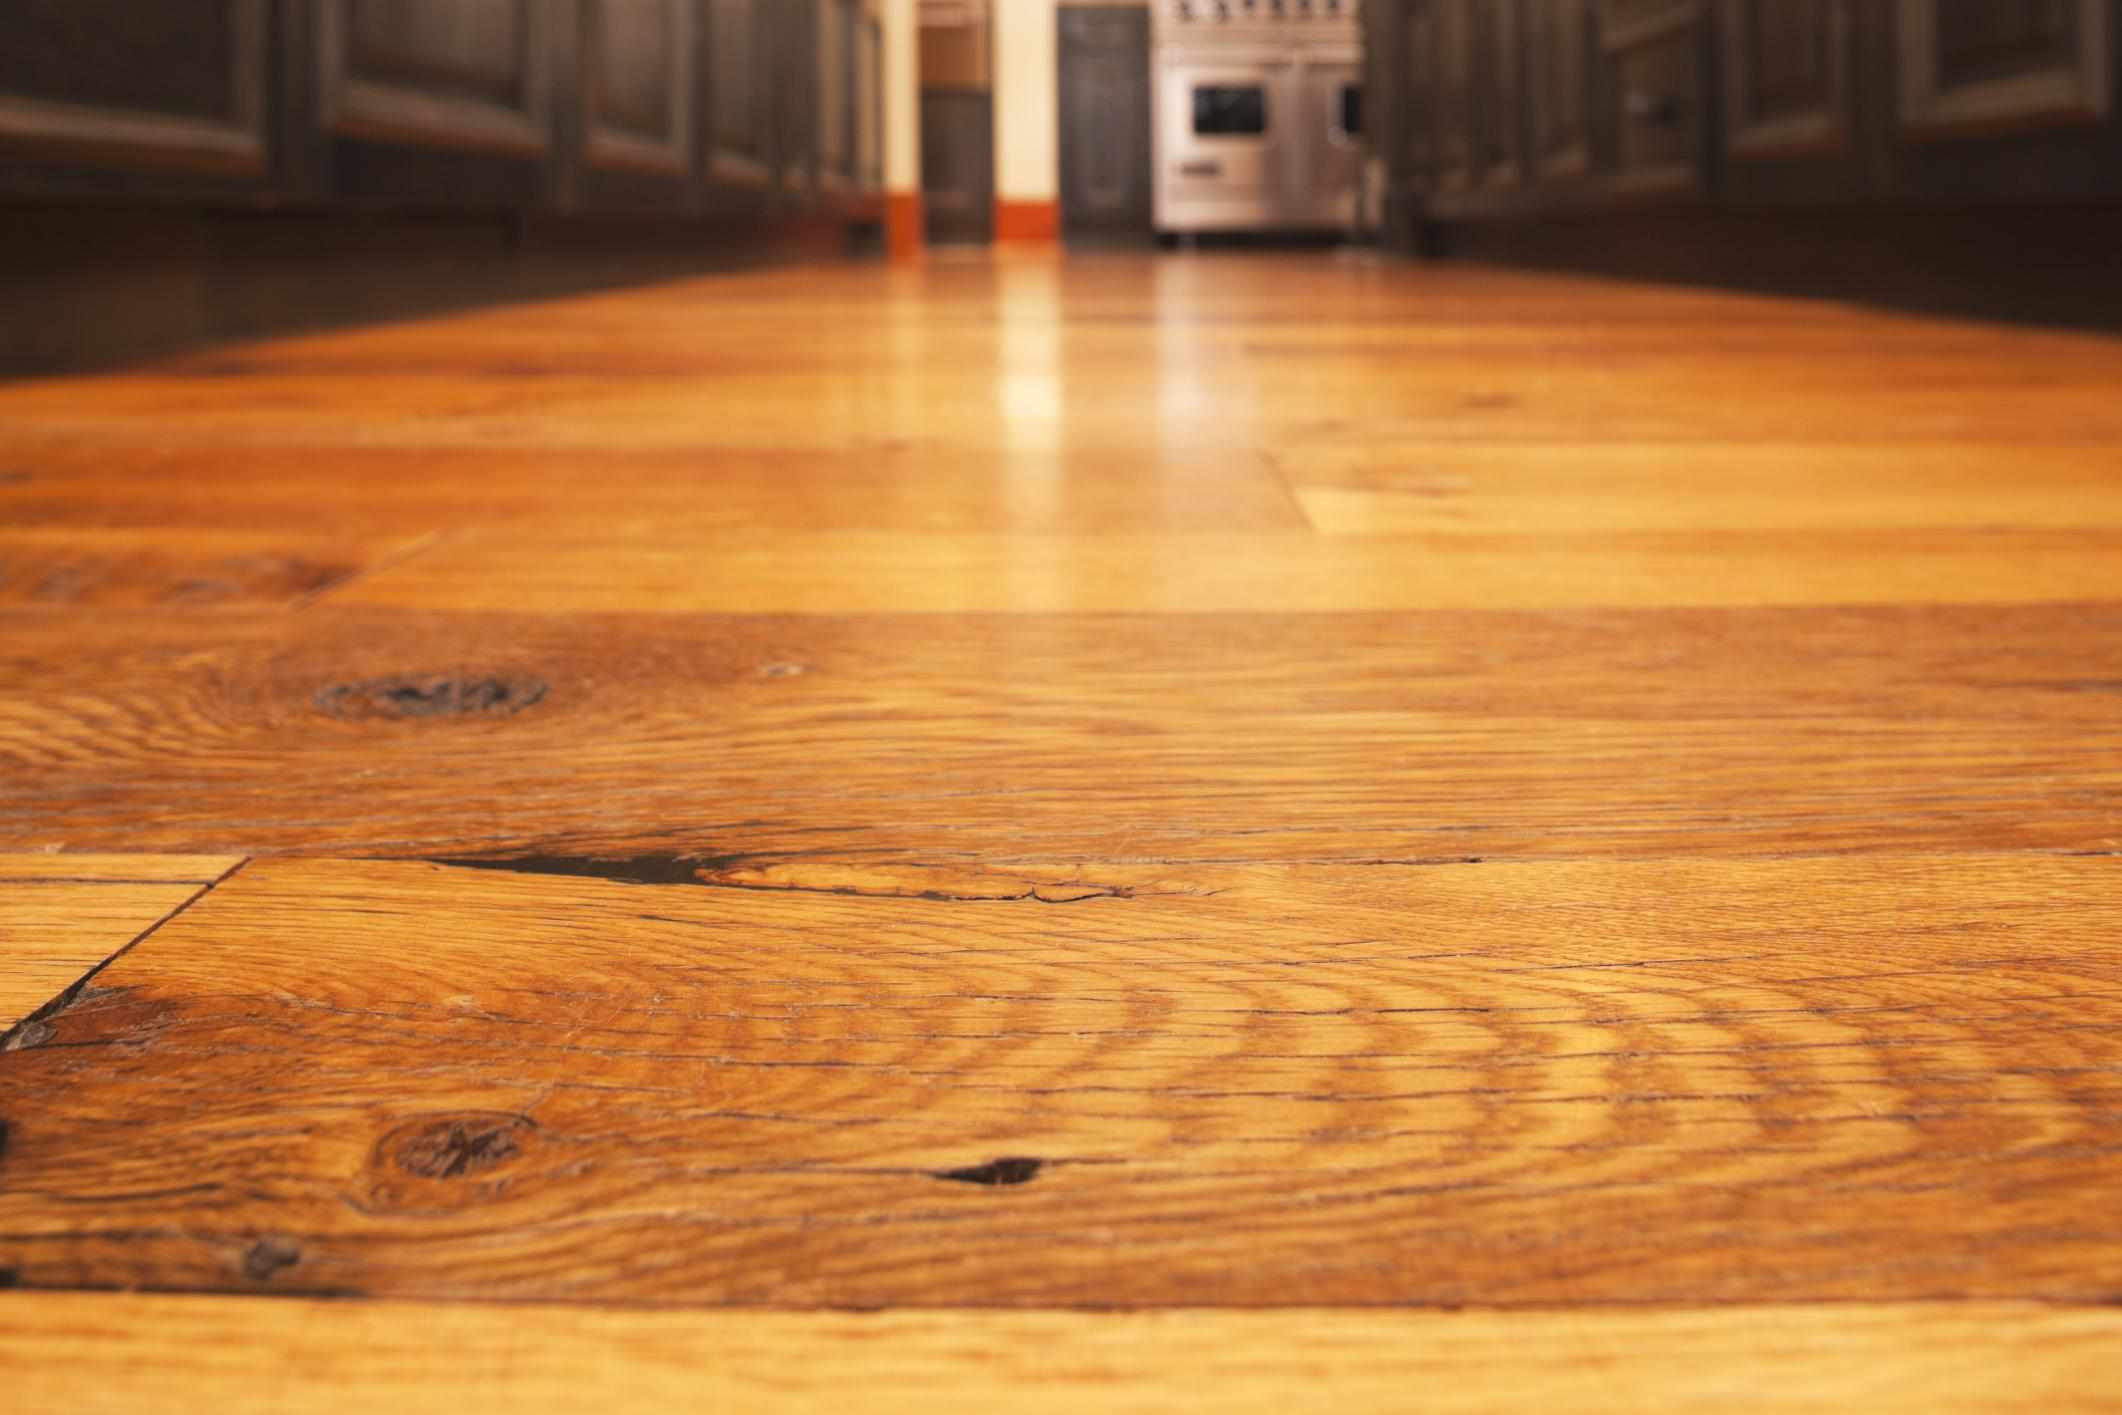 15 Lovable Cost to Refinish Hardwood Floors Per Sq Ft 2022 free download cost to refinish hardwood floors per sq ft of how much to refinish wood floors adventures in staining my red oak pertaining to how much to refinish wood floors how to sand hardwood floors